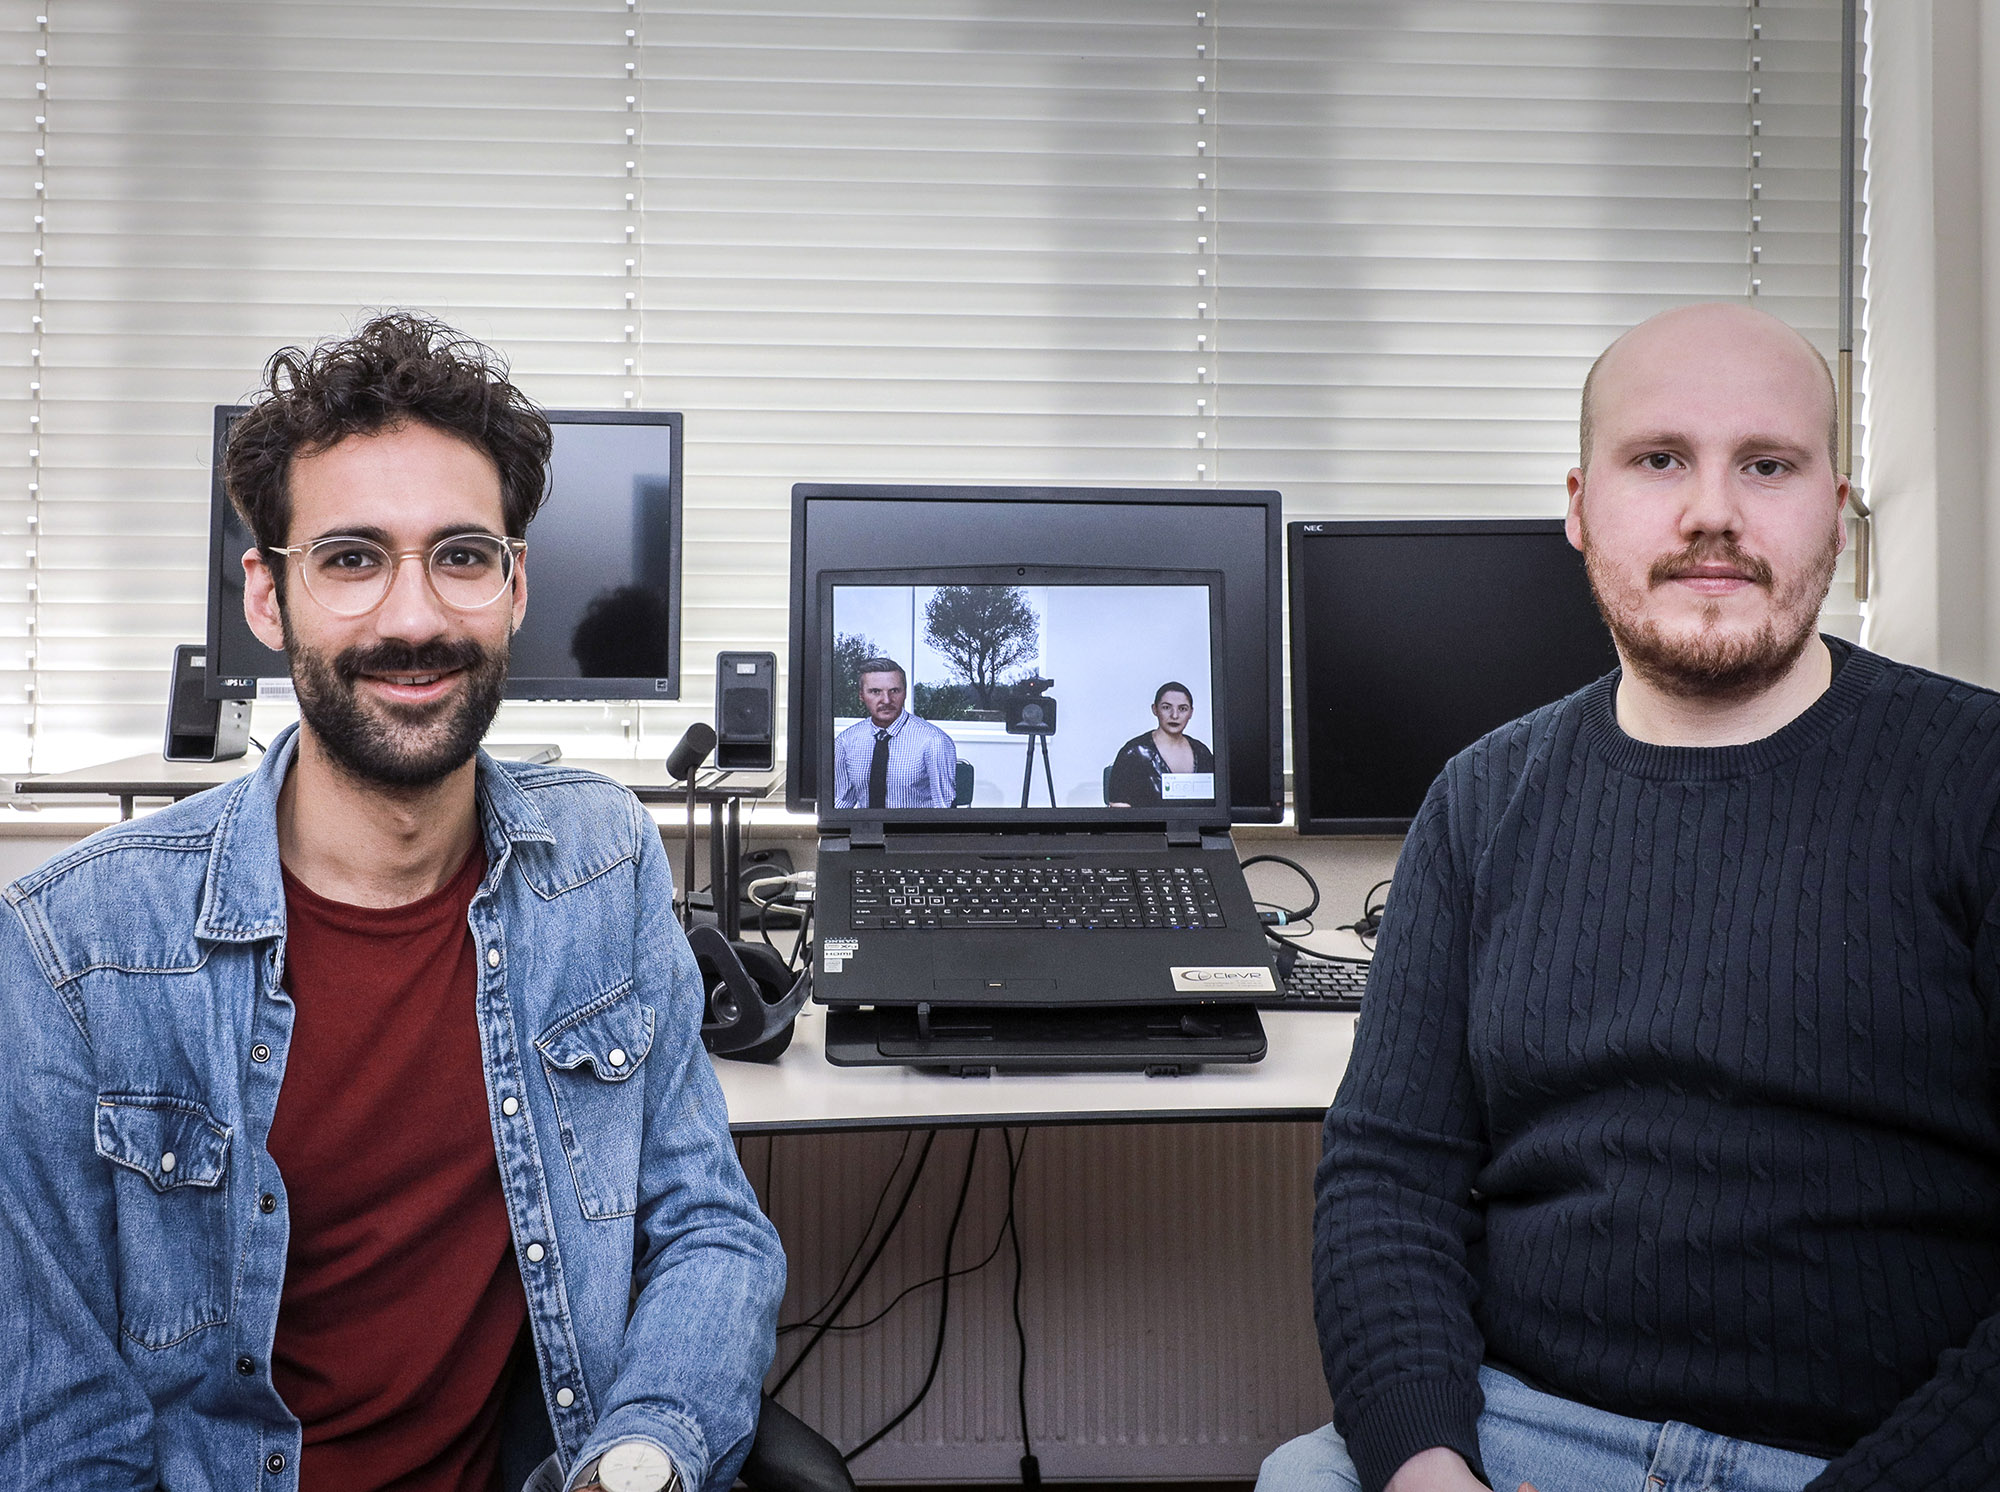 PhD researcher Mathijs Nijland (left) and research associate Bart Lestestuiver (right) are closely involved in carrying out the stress resilience study called 'Building Bounce Back'.